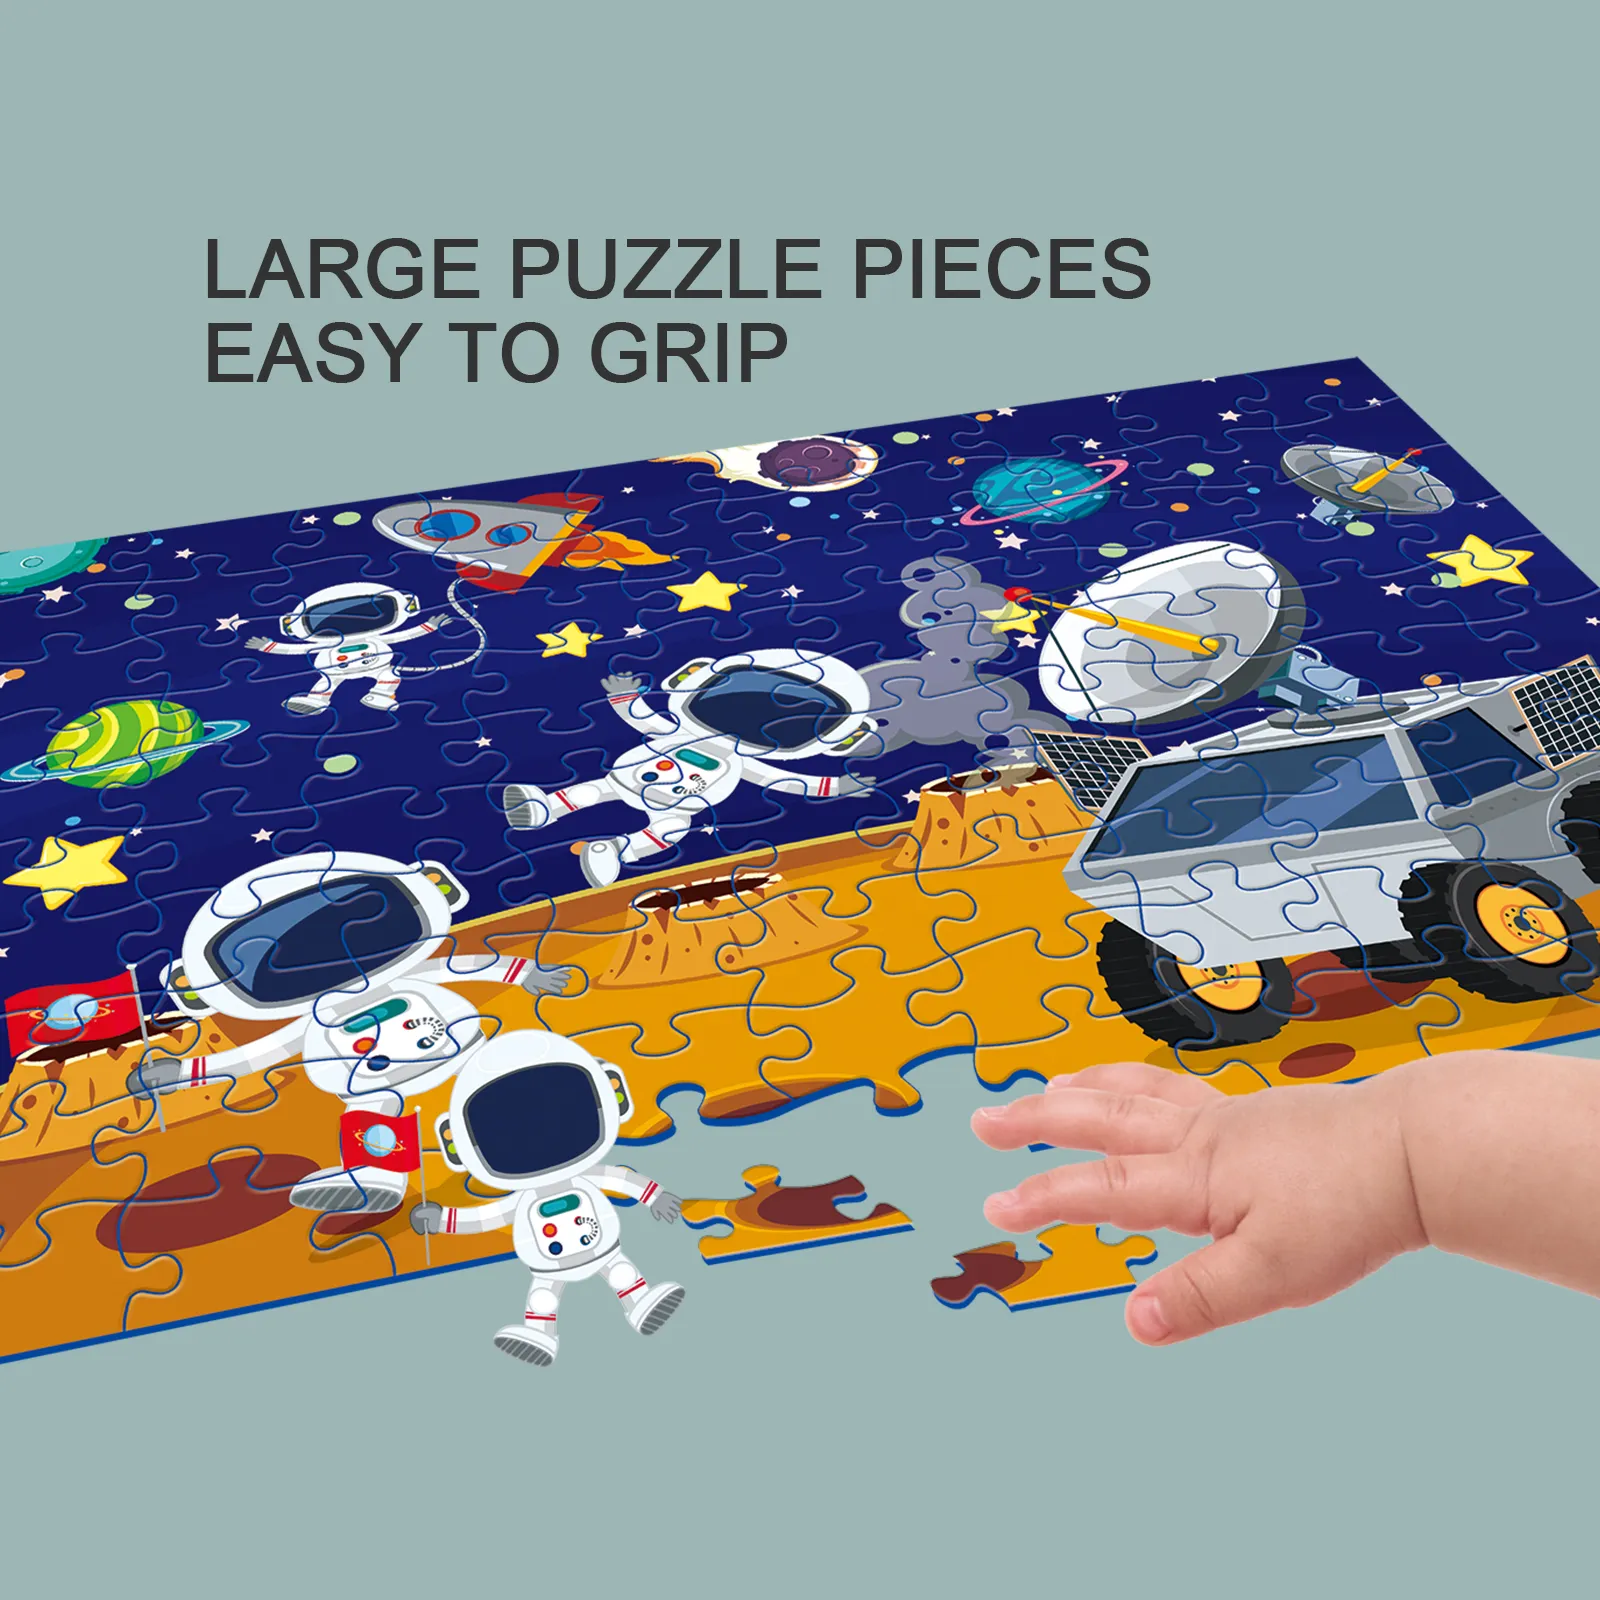 100-Piece Children's Space-themed Jigsaw Puzzle - Large Pieces For Easy Assembly